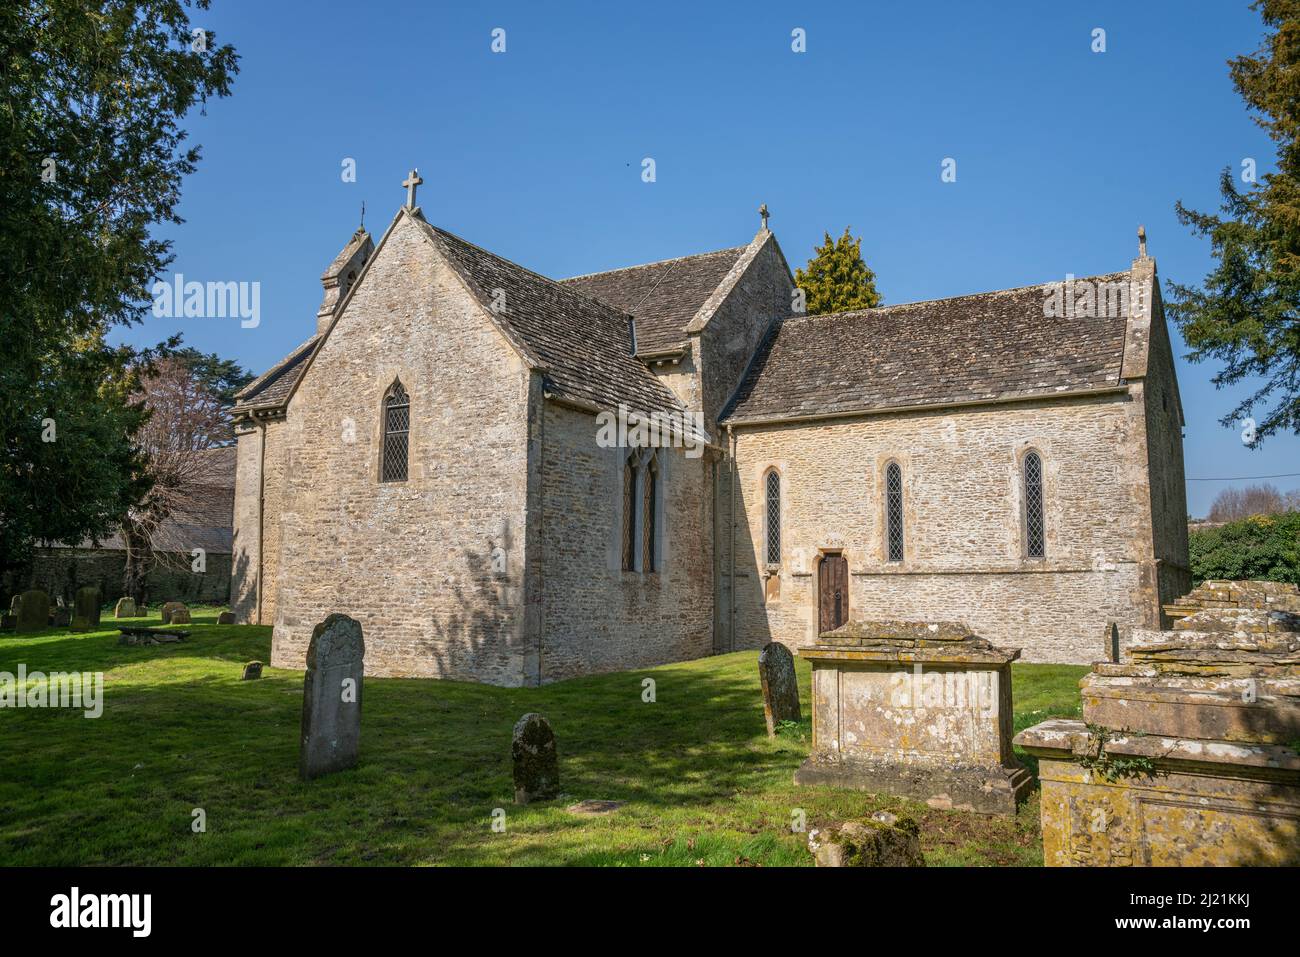 St Peter's 12th Century Saxon church in the village of Southrop, The Cotswolds, England, United Kingdom Stock Photo